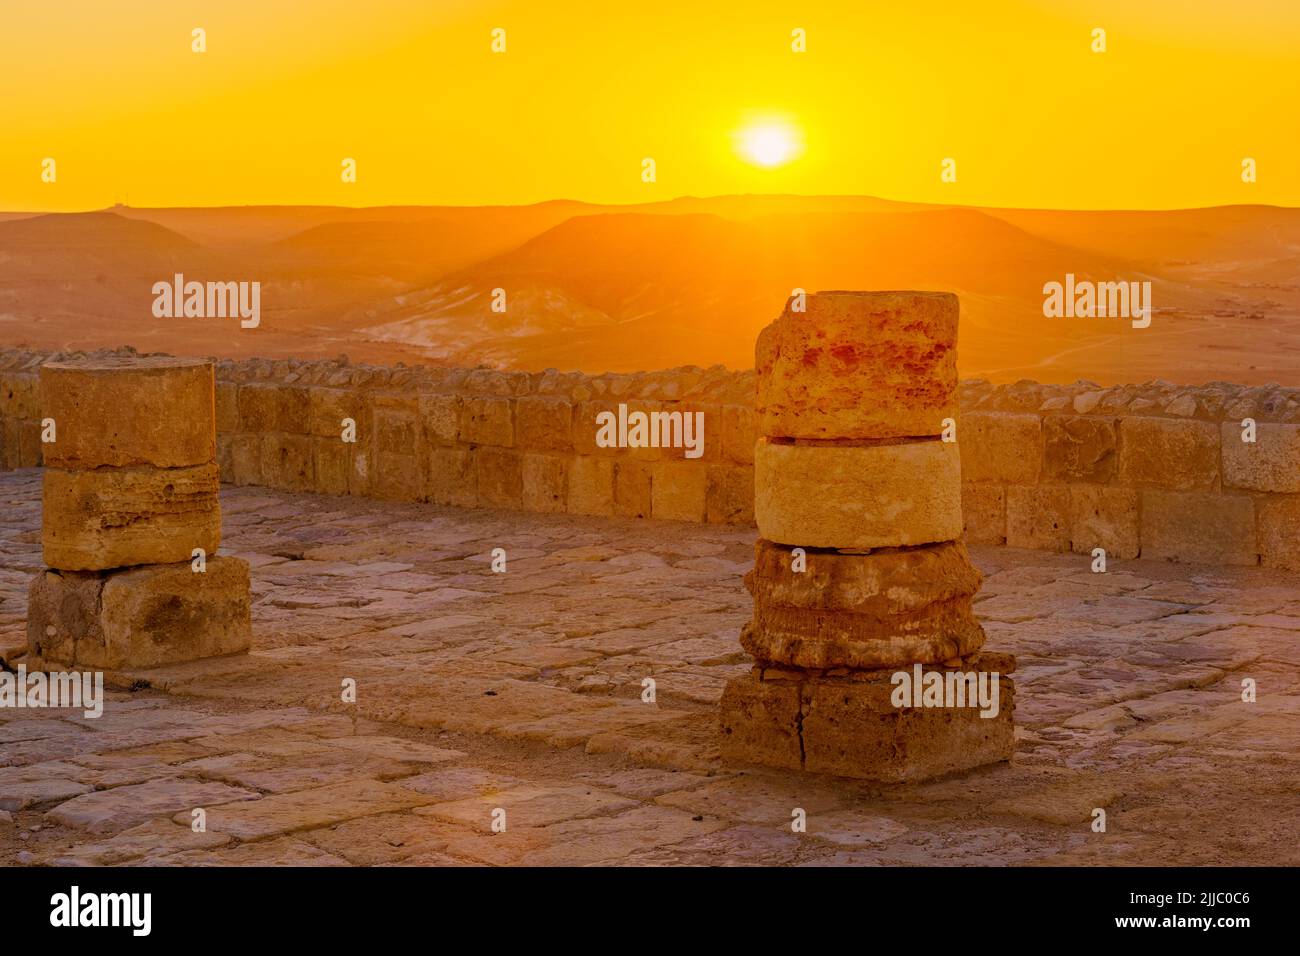 Sunset view with ancient ruins, in the Nabataean city of Avdat, the Negev Desert, Southern Israel Stock Photo